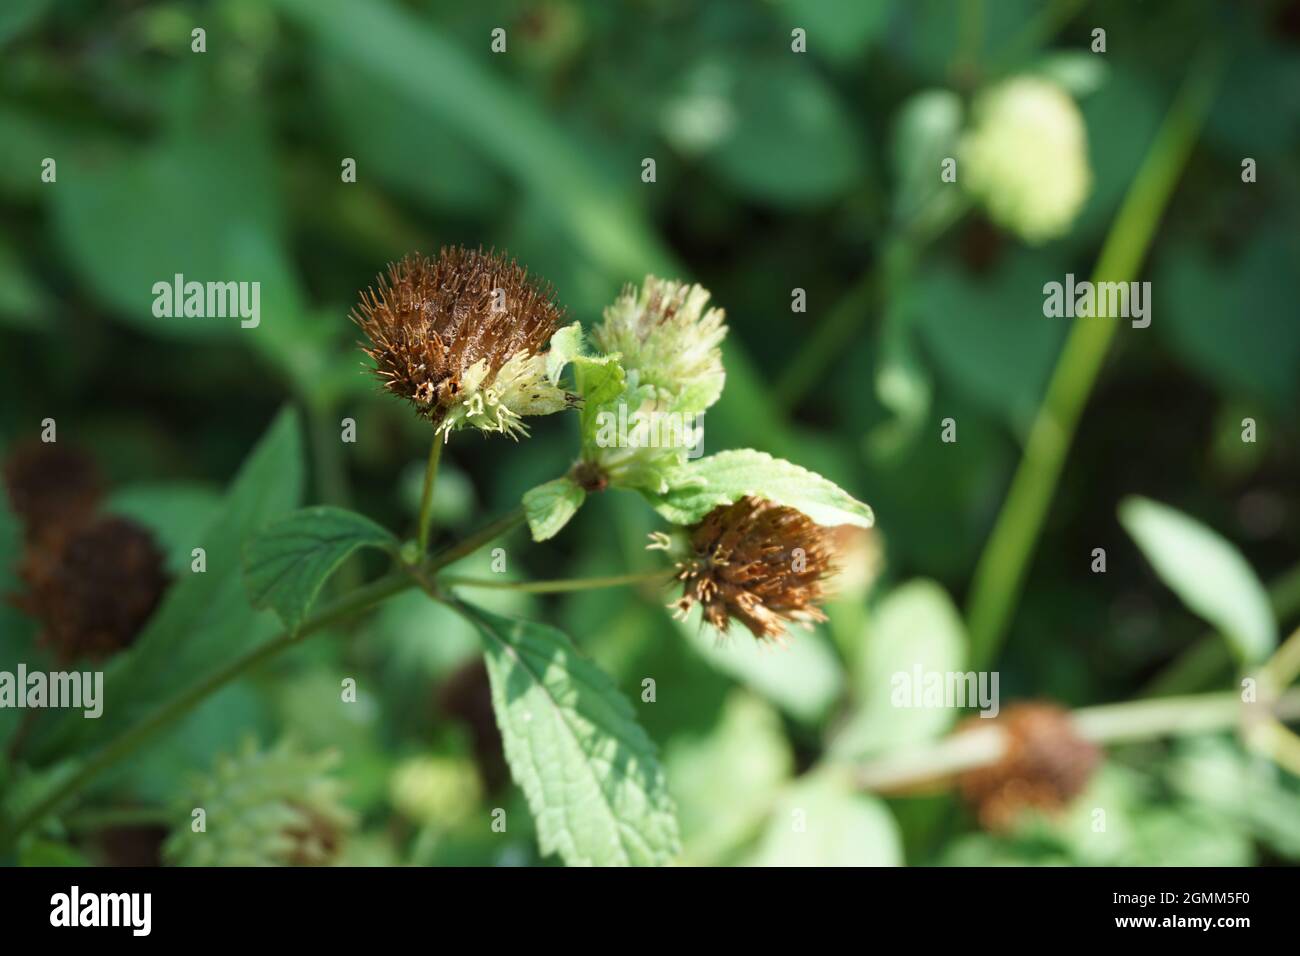 Bushmints (also called cluster bushmint, musky bushmint, musky mint) with a natural background. Stock Photo